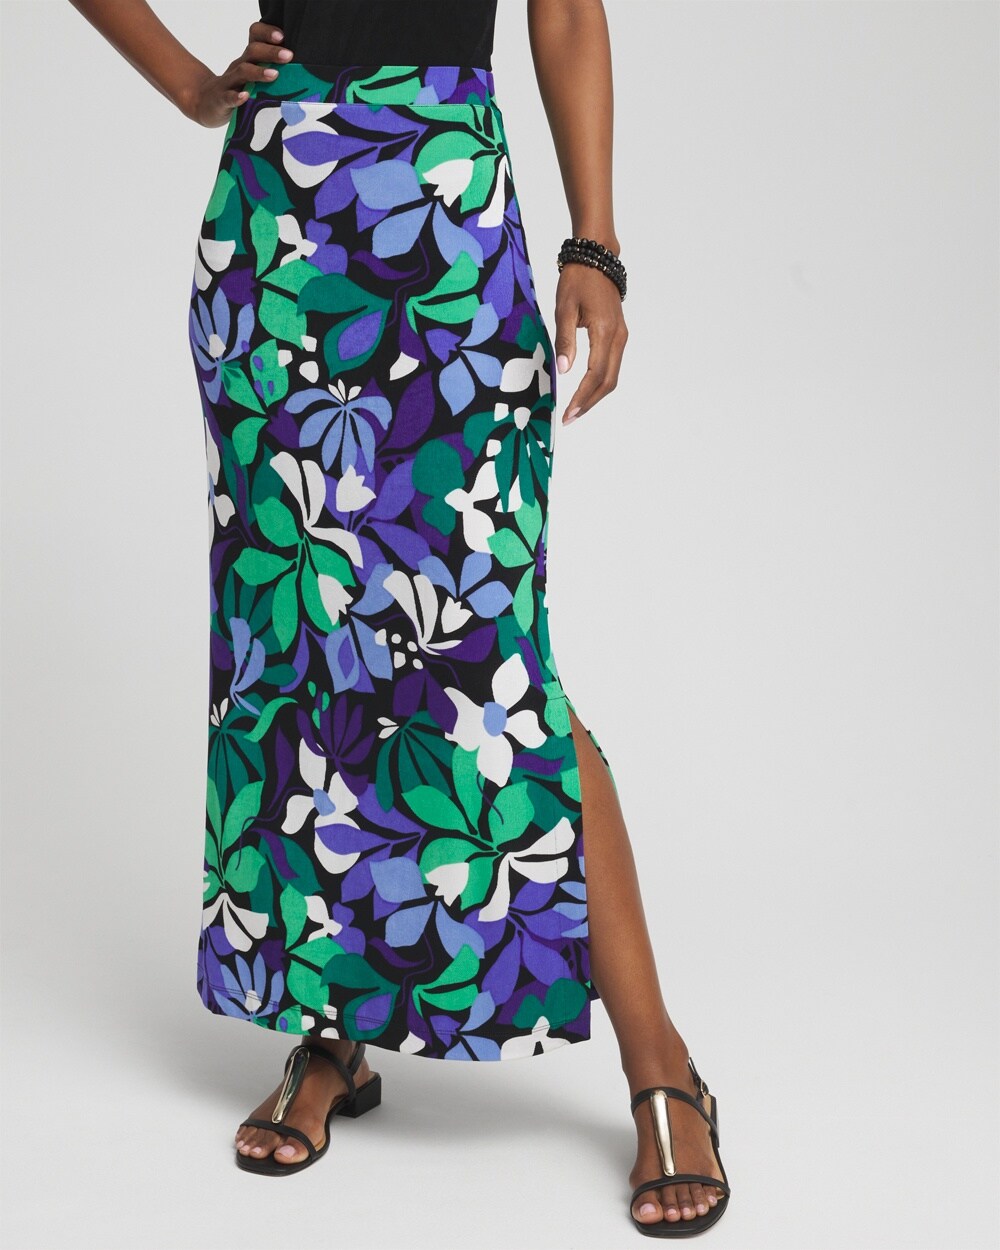 Petite Travelers™ Floral Maxi Skirt gives